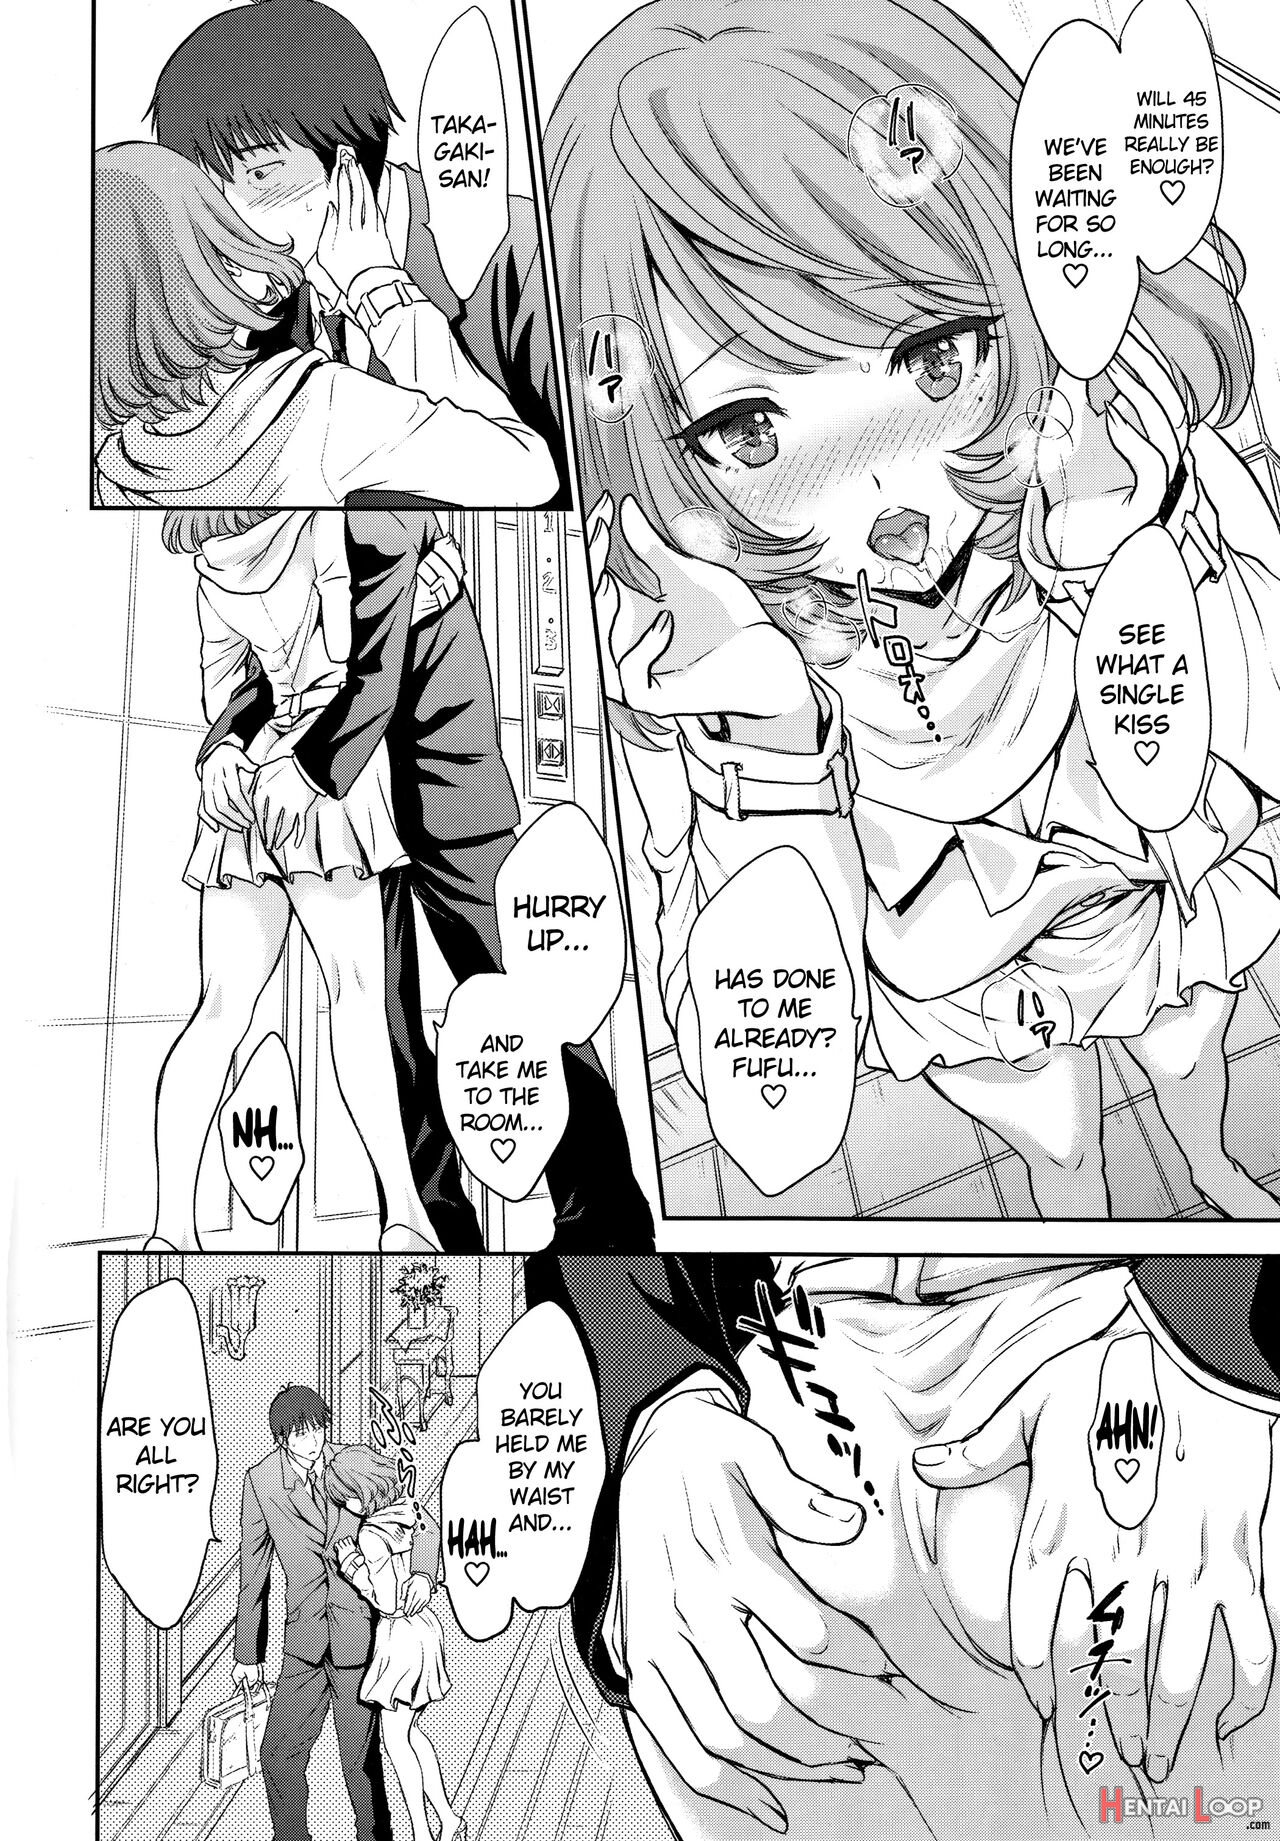 Meeting With Kaede-san In A Love Hotel page 5